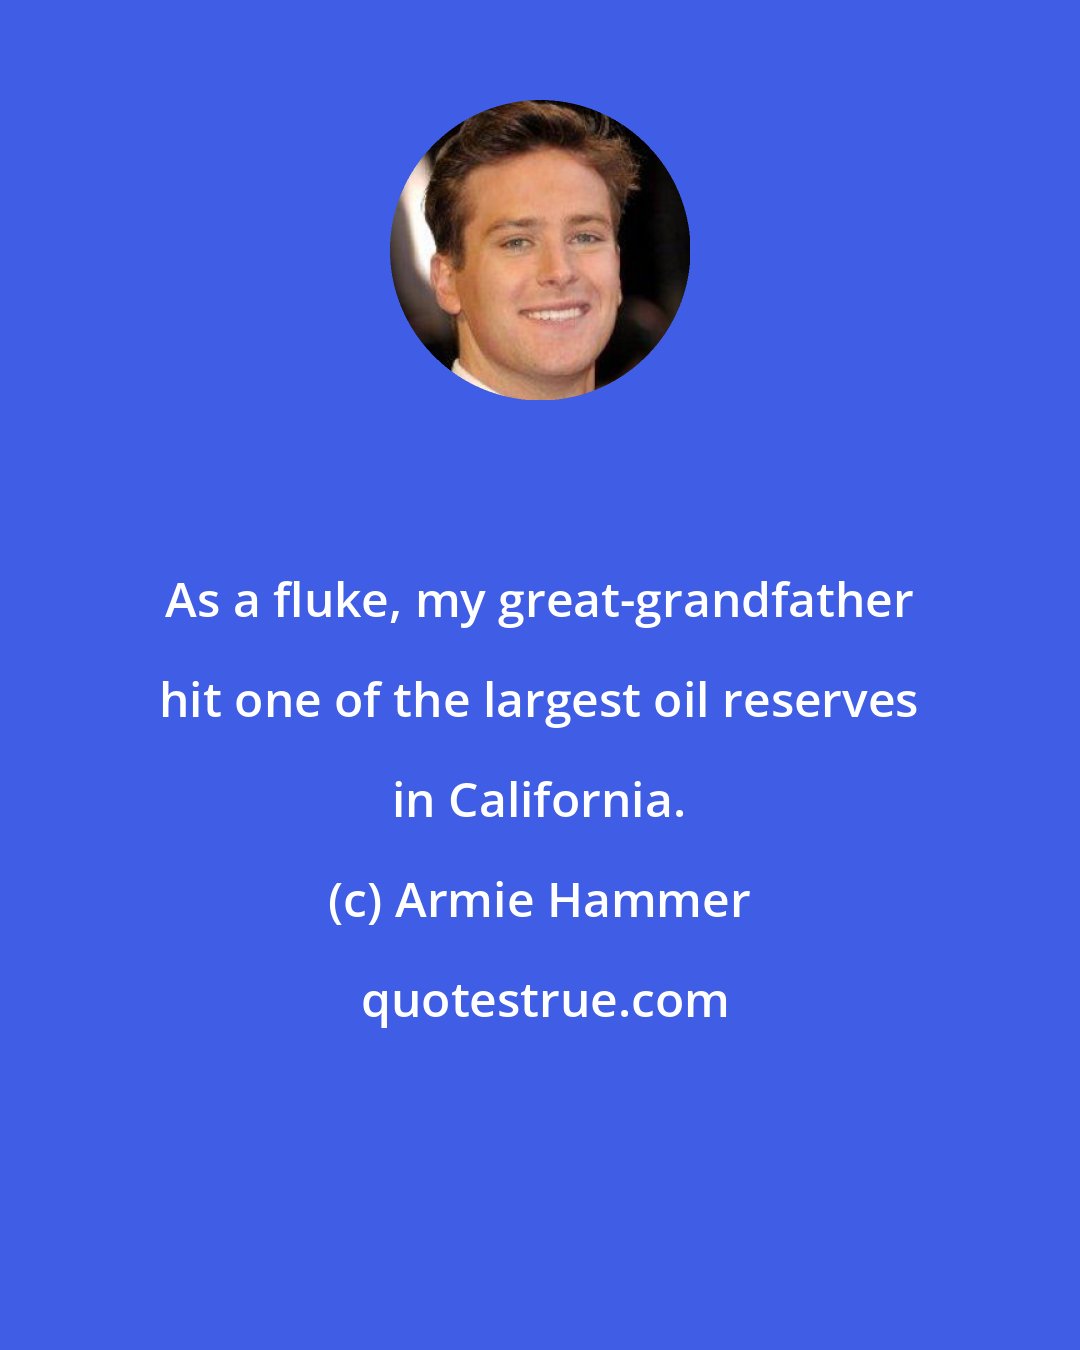 Armie Hammer: As a fluke, my great-grandfather hit one of the largest oil reserves in California.